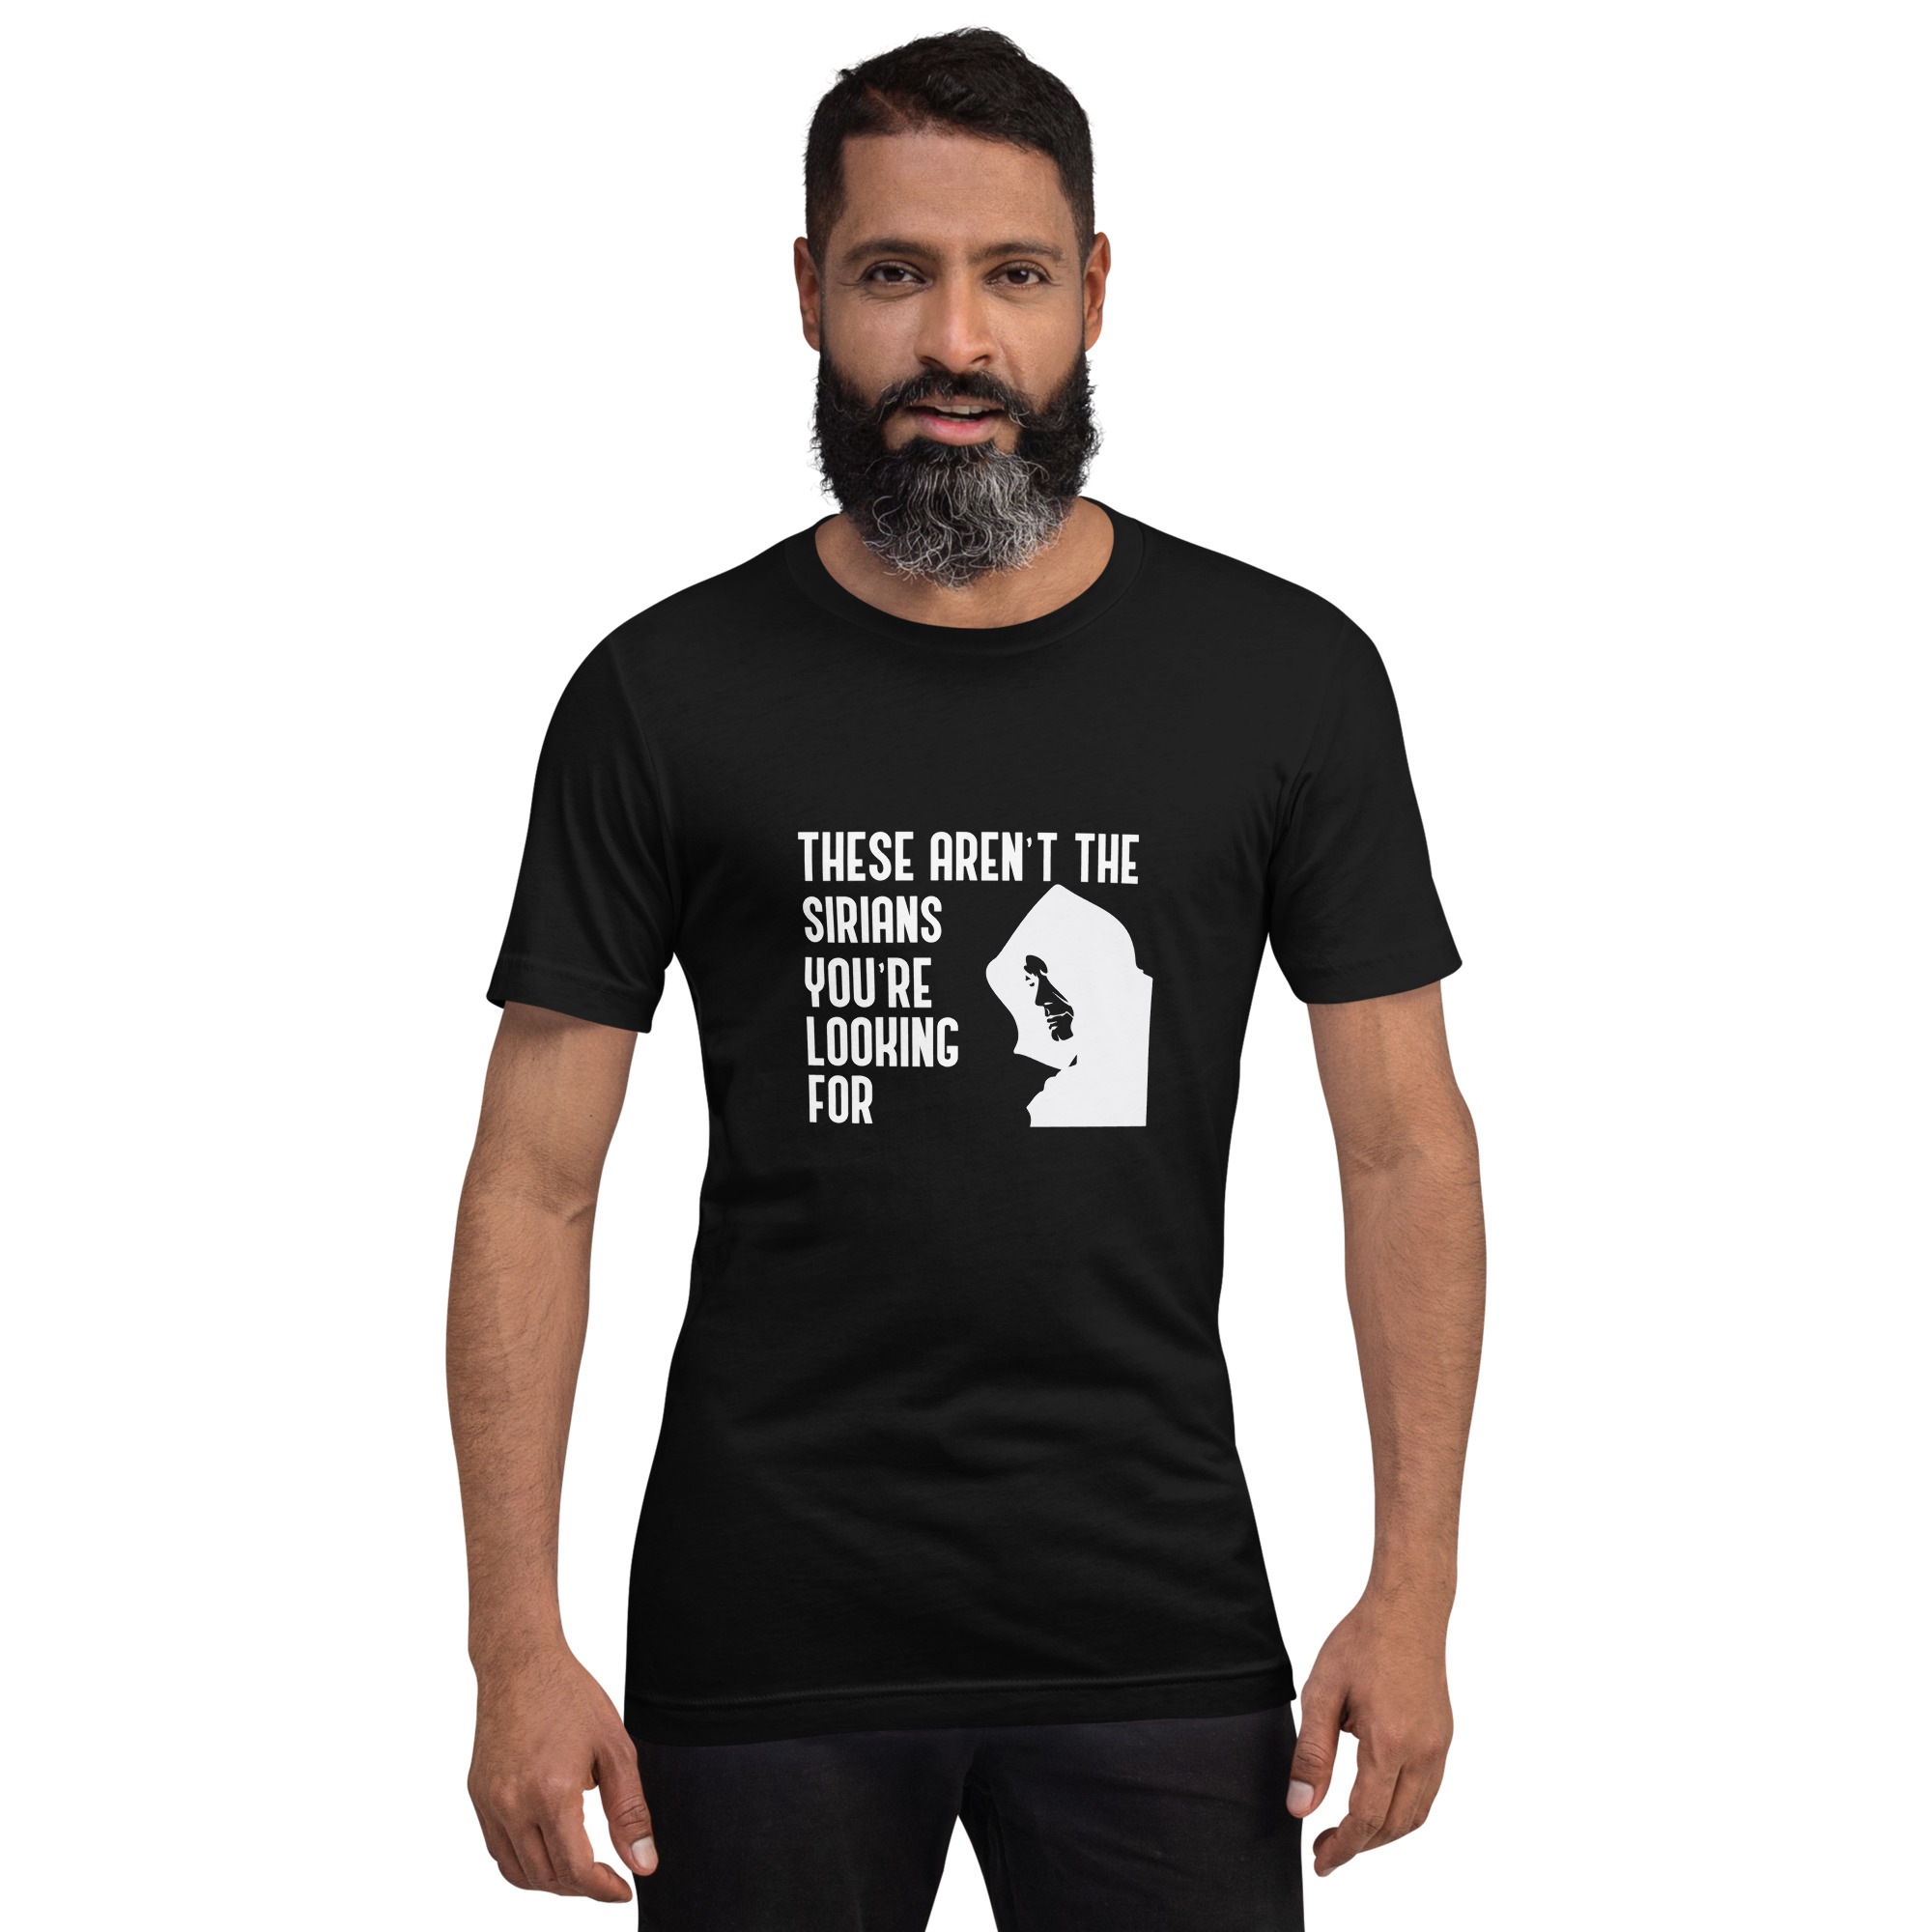 These Aren't The Sirians You're Looking For Tshirt